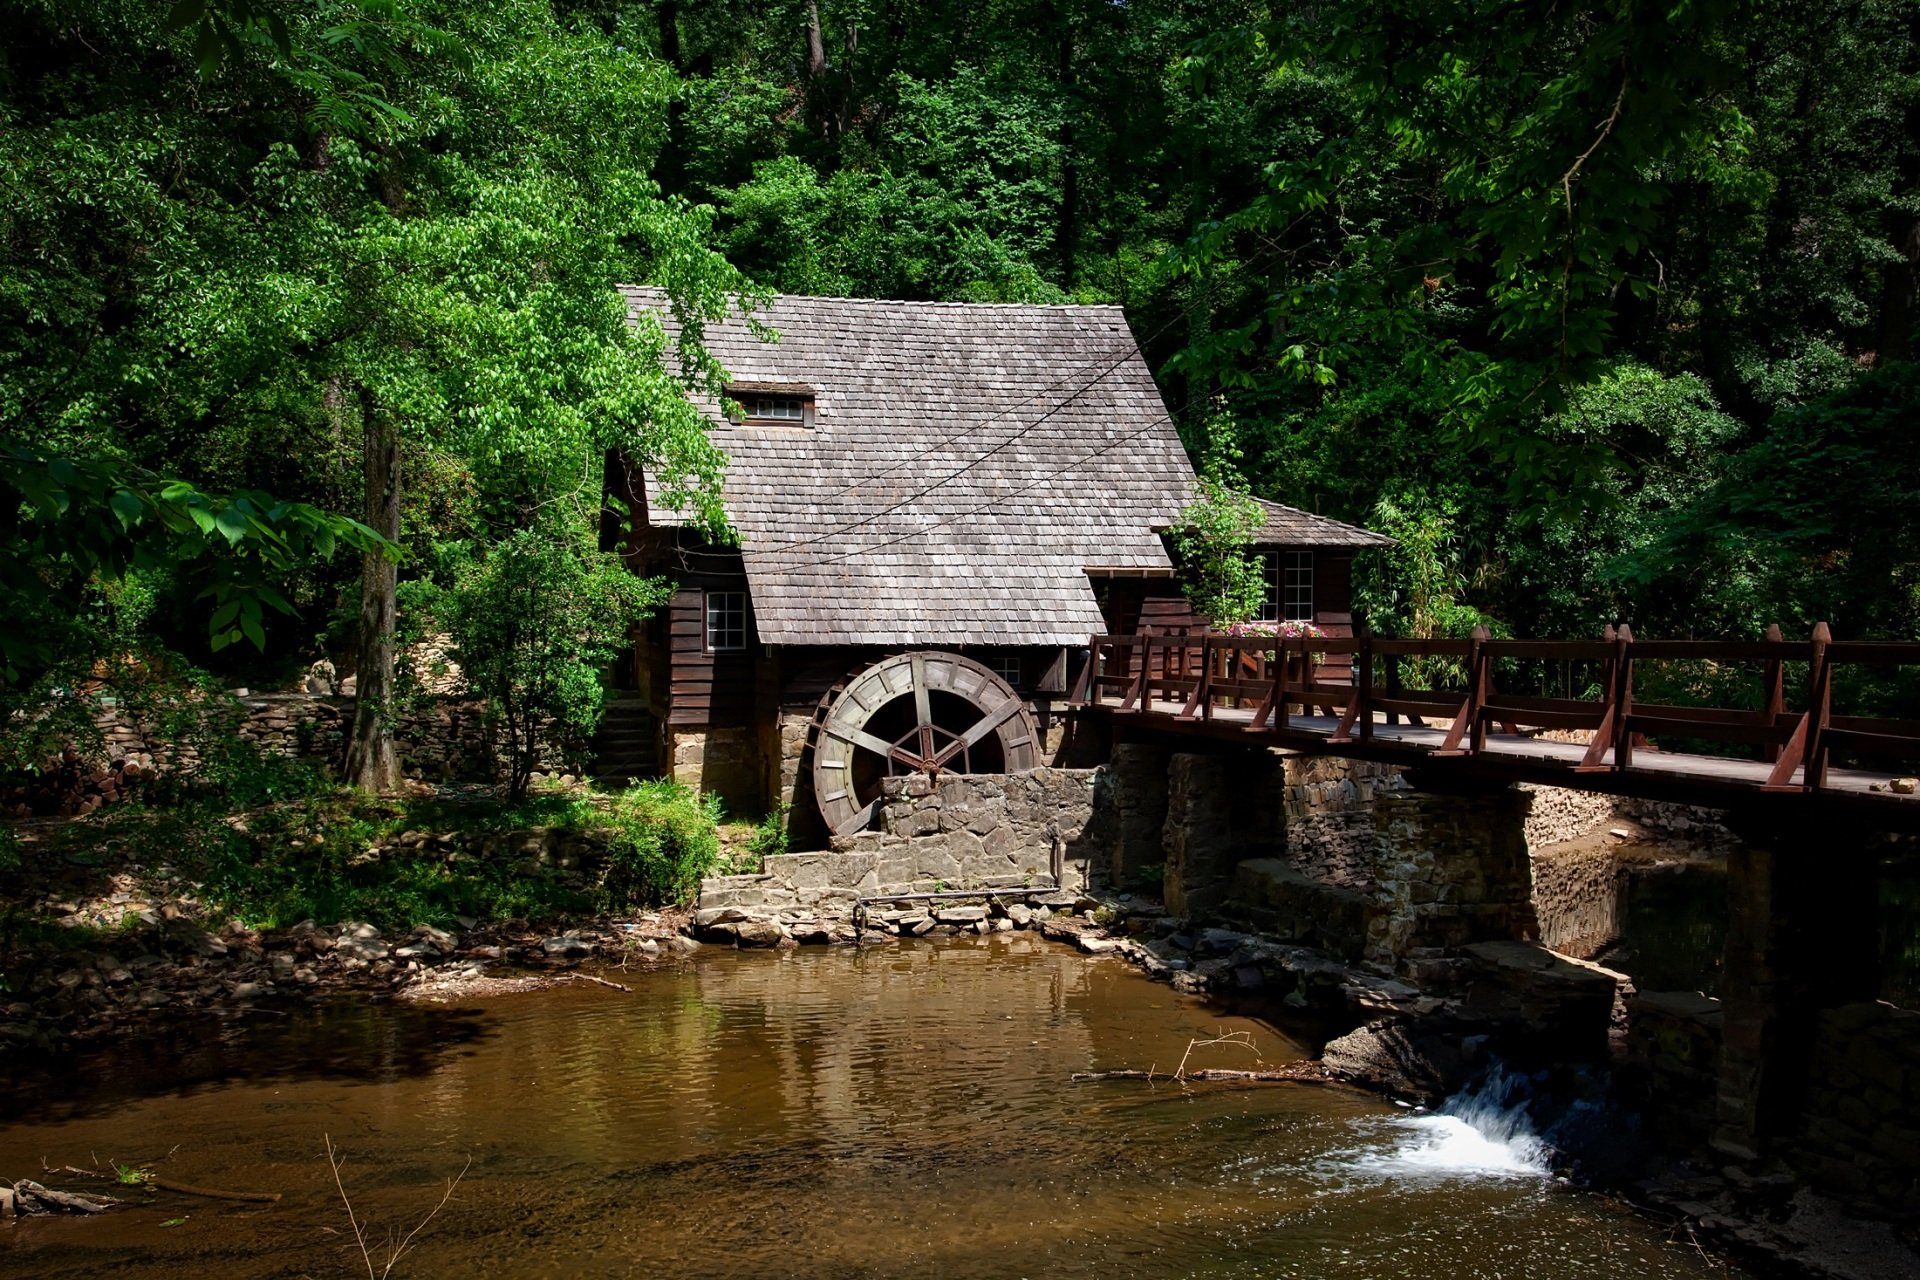 Lumber mill in Alabama, powered by a water wheel